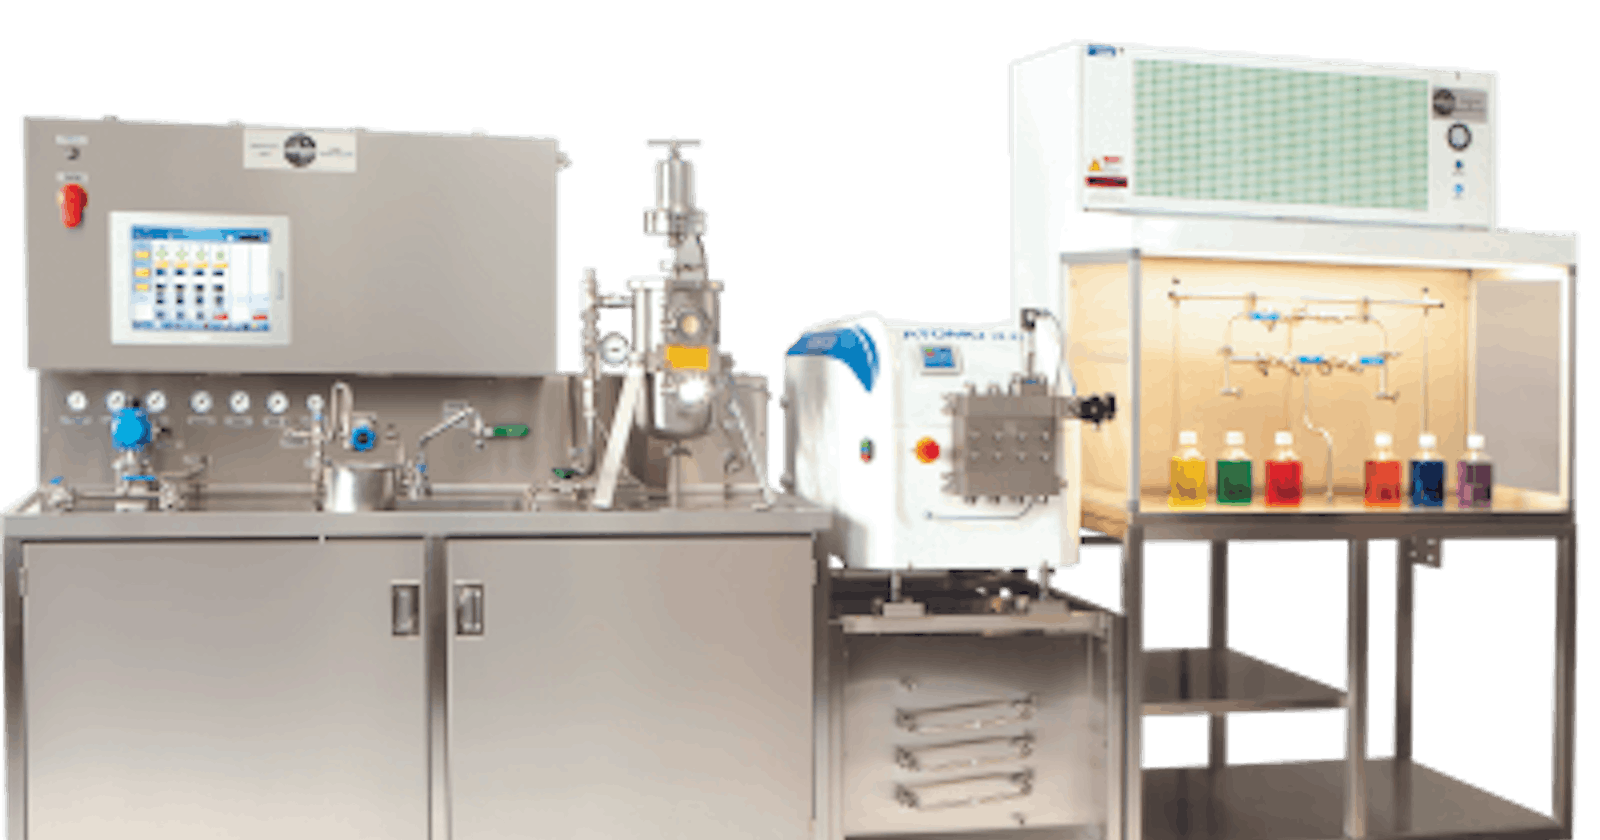 Small Scale Milk Pasteurization Equipment: Ensuring Safety and Quality